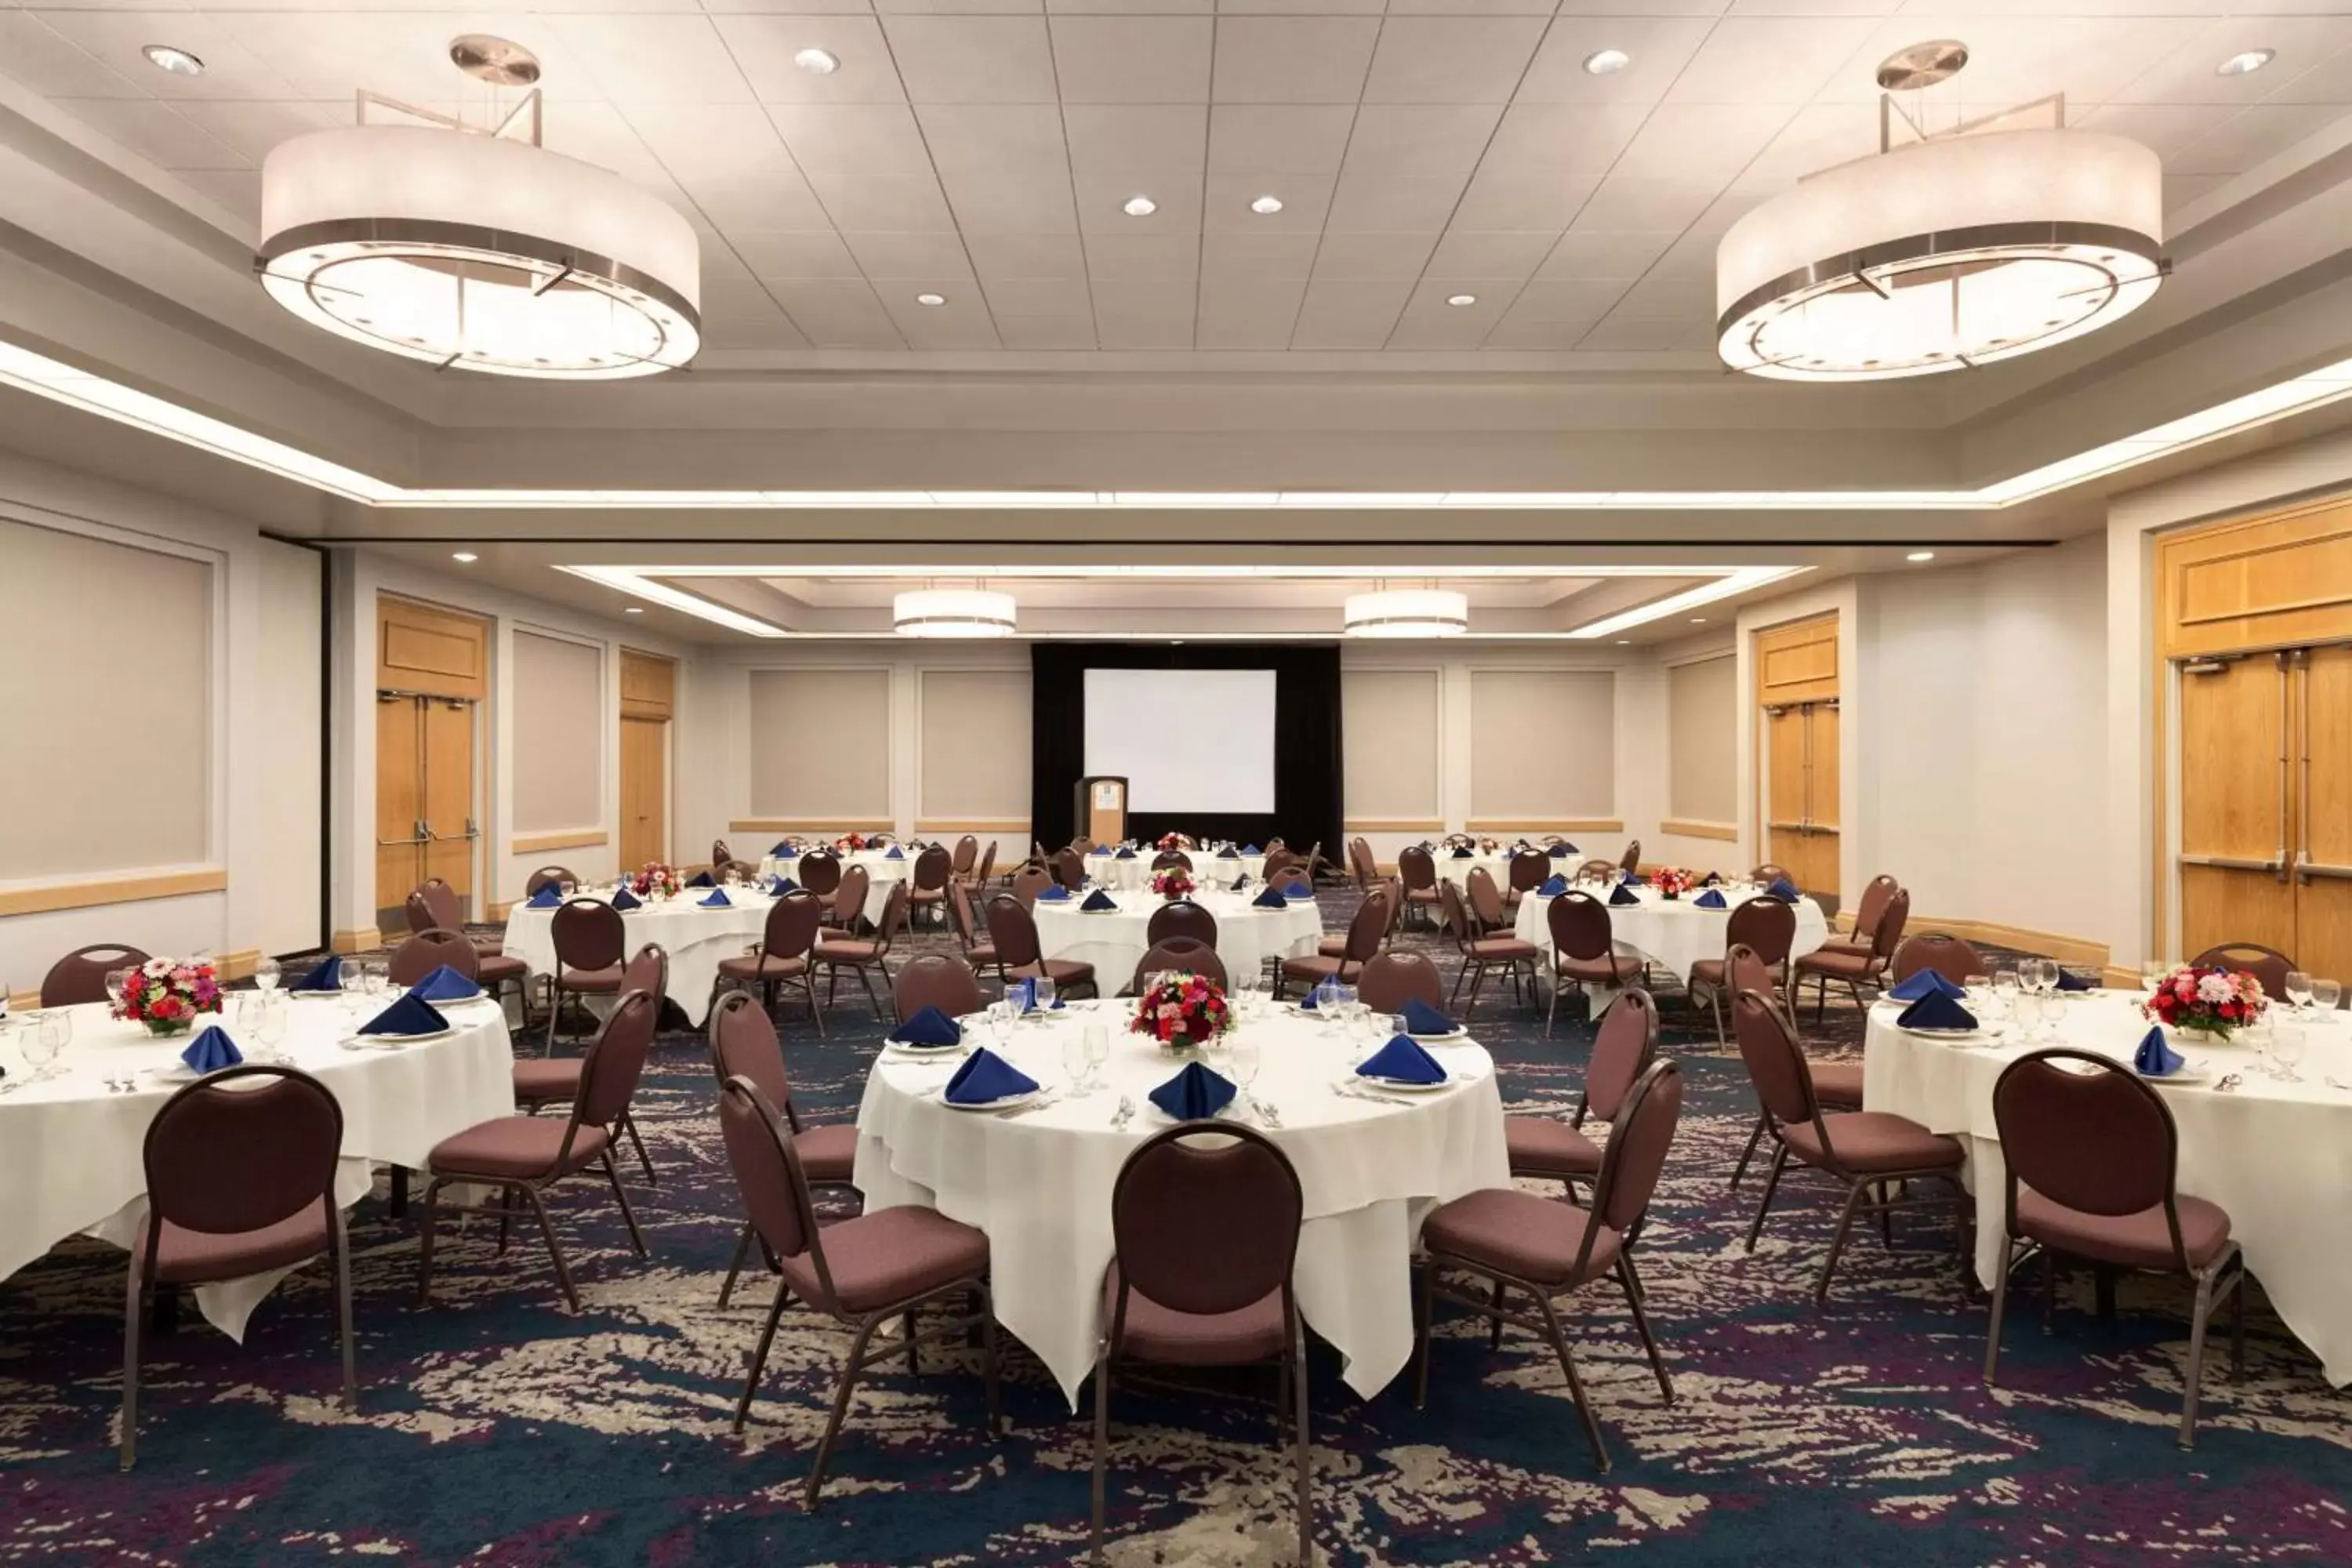 Meeting/conference room, Banquet Facilities in Embassy Suites San Luis Obispo